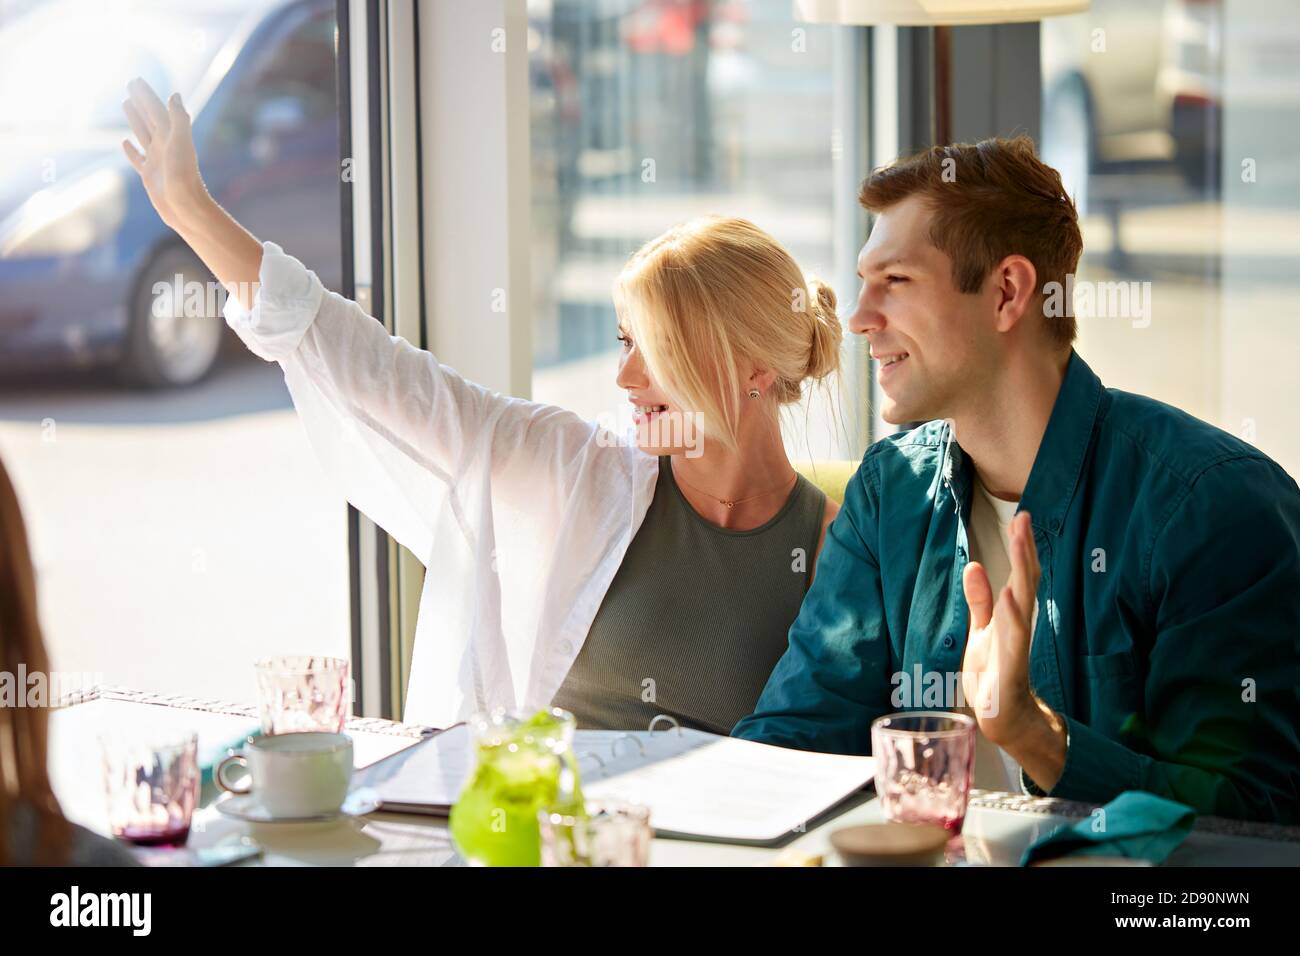 young beautiful couple in cafe have seen someone through window, they were waiting for friends to spend time together in restaurant. they show hello gesture at side Stock Photo